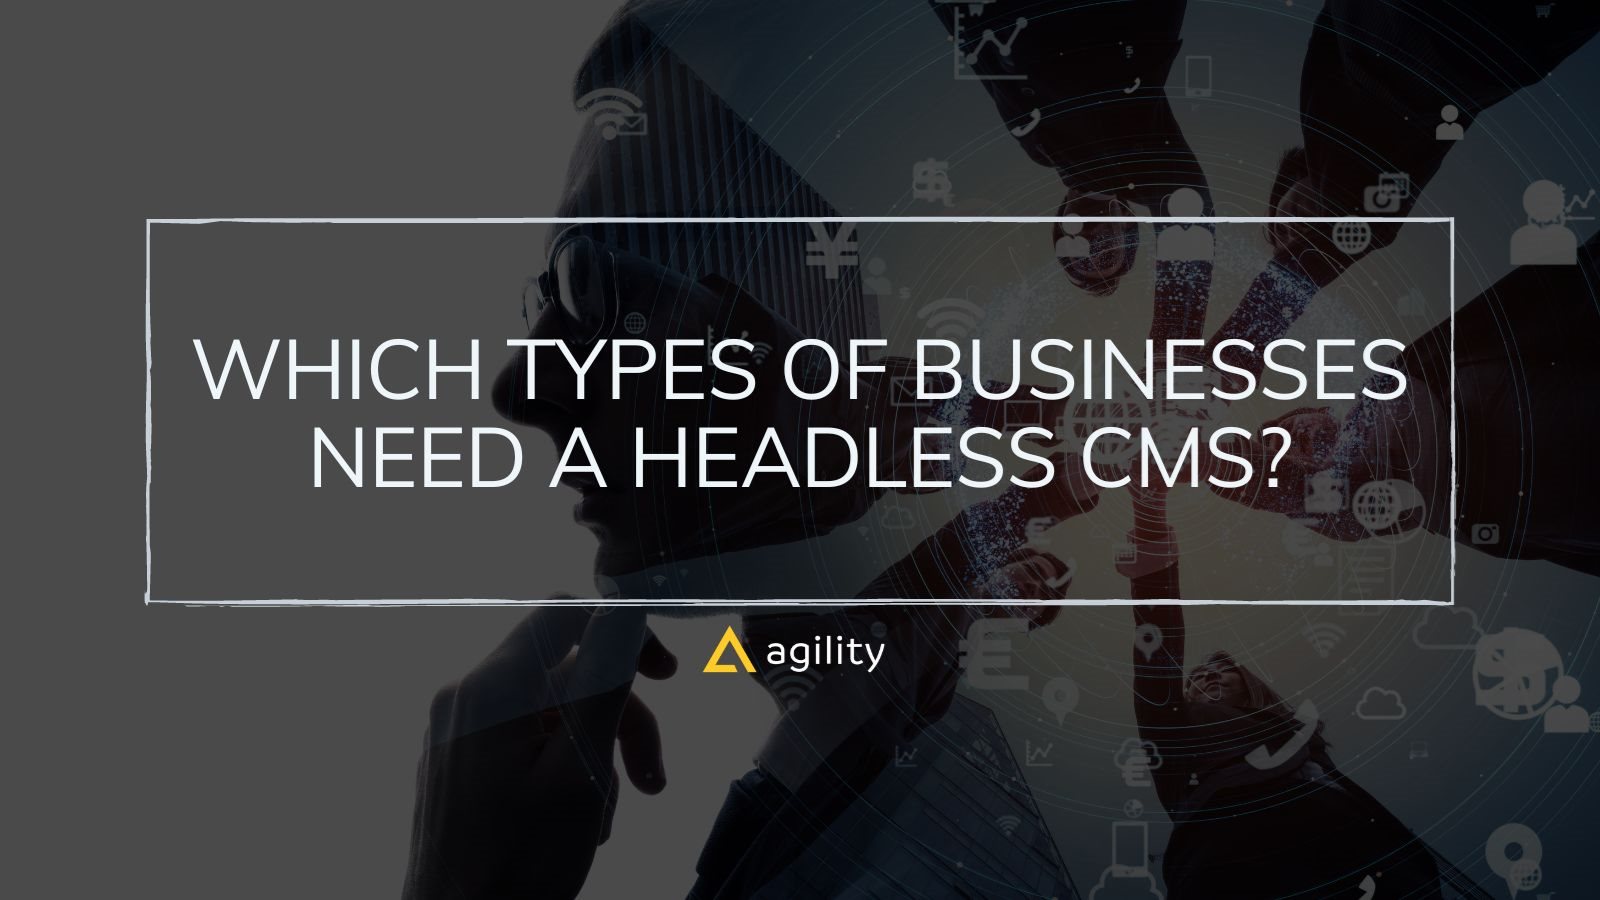 Which Types of Businesses Need a Headless CMS?